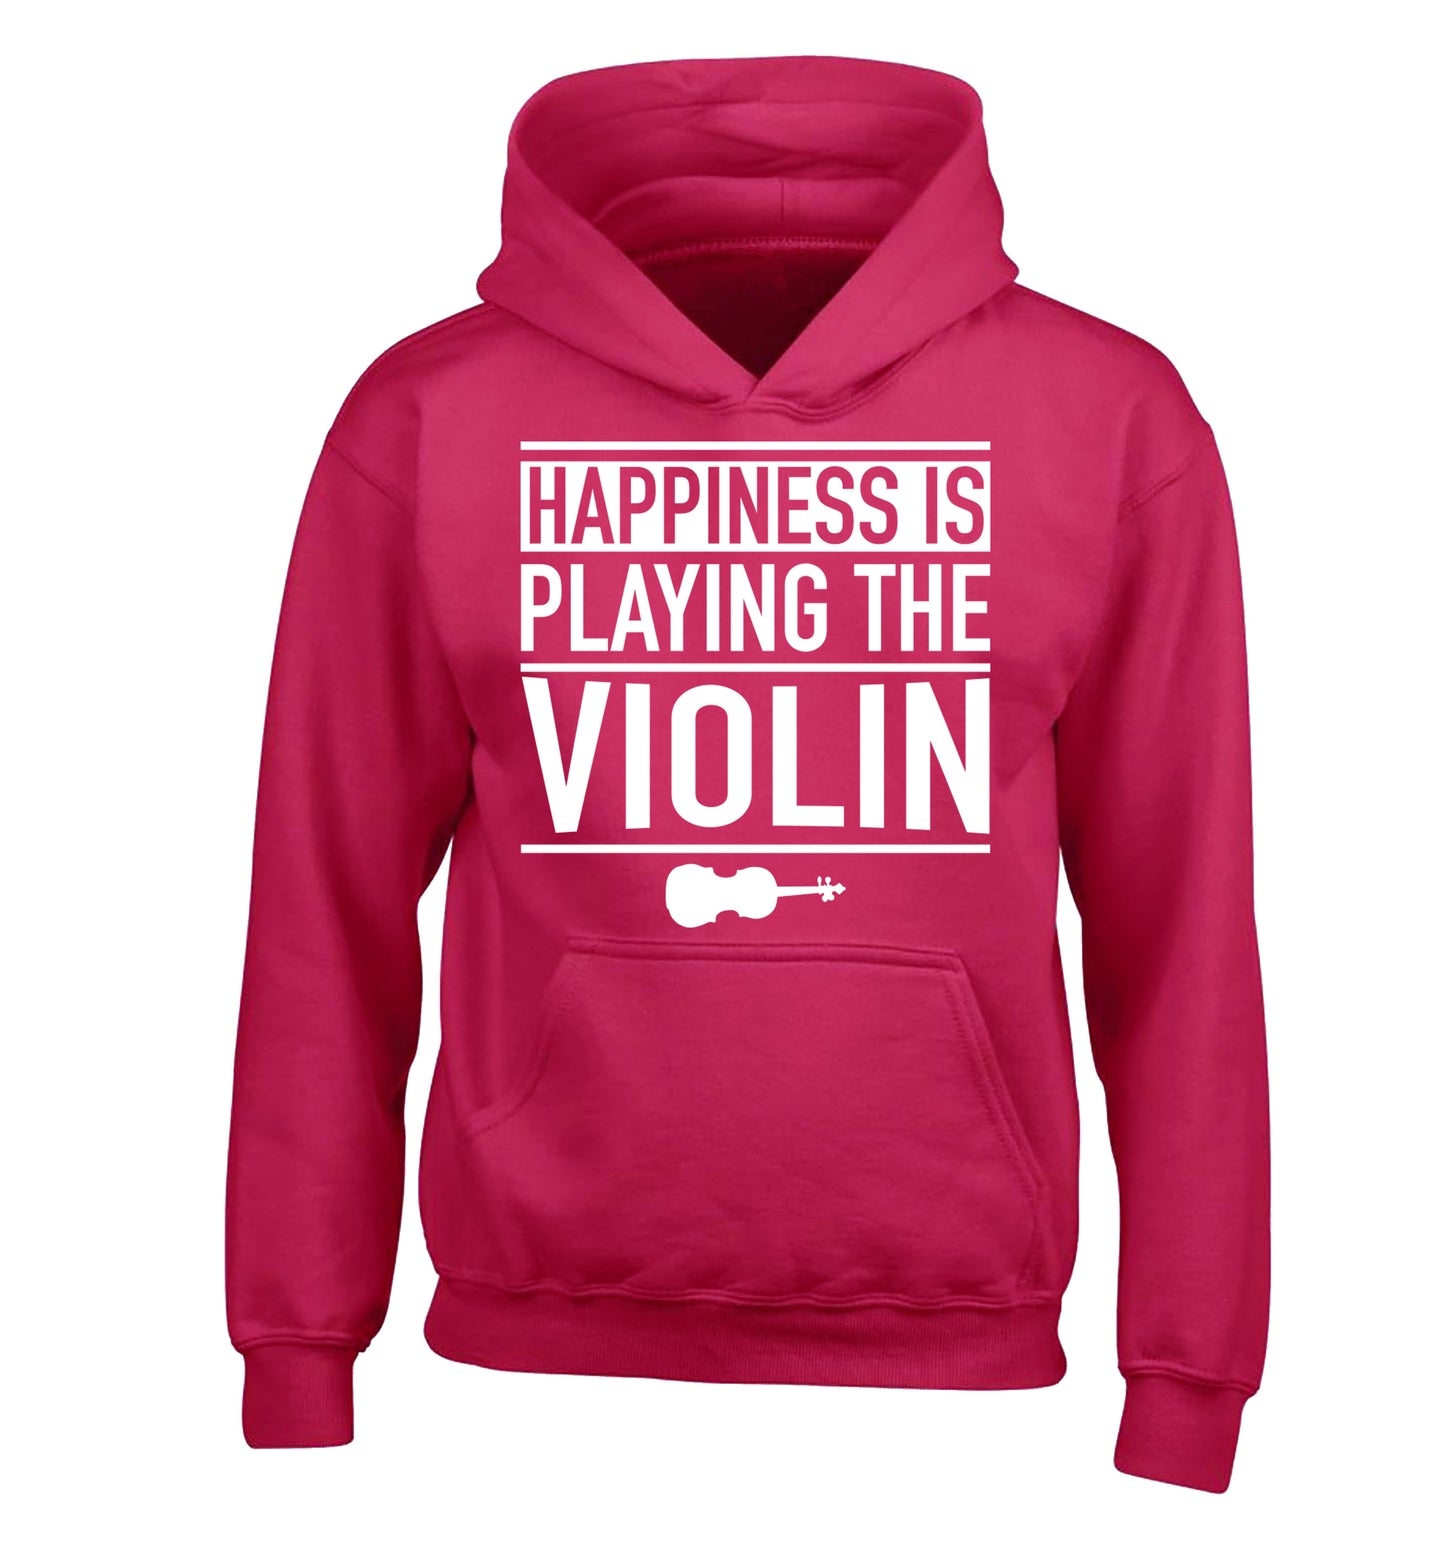 Happiness is playing the violin children's pink hoodie 12-13 Years